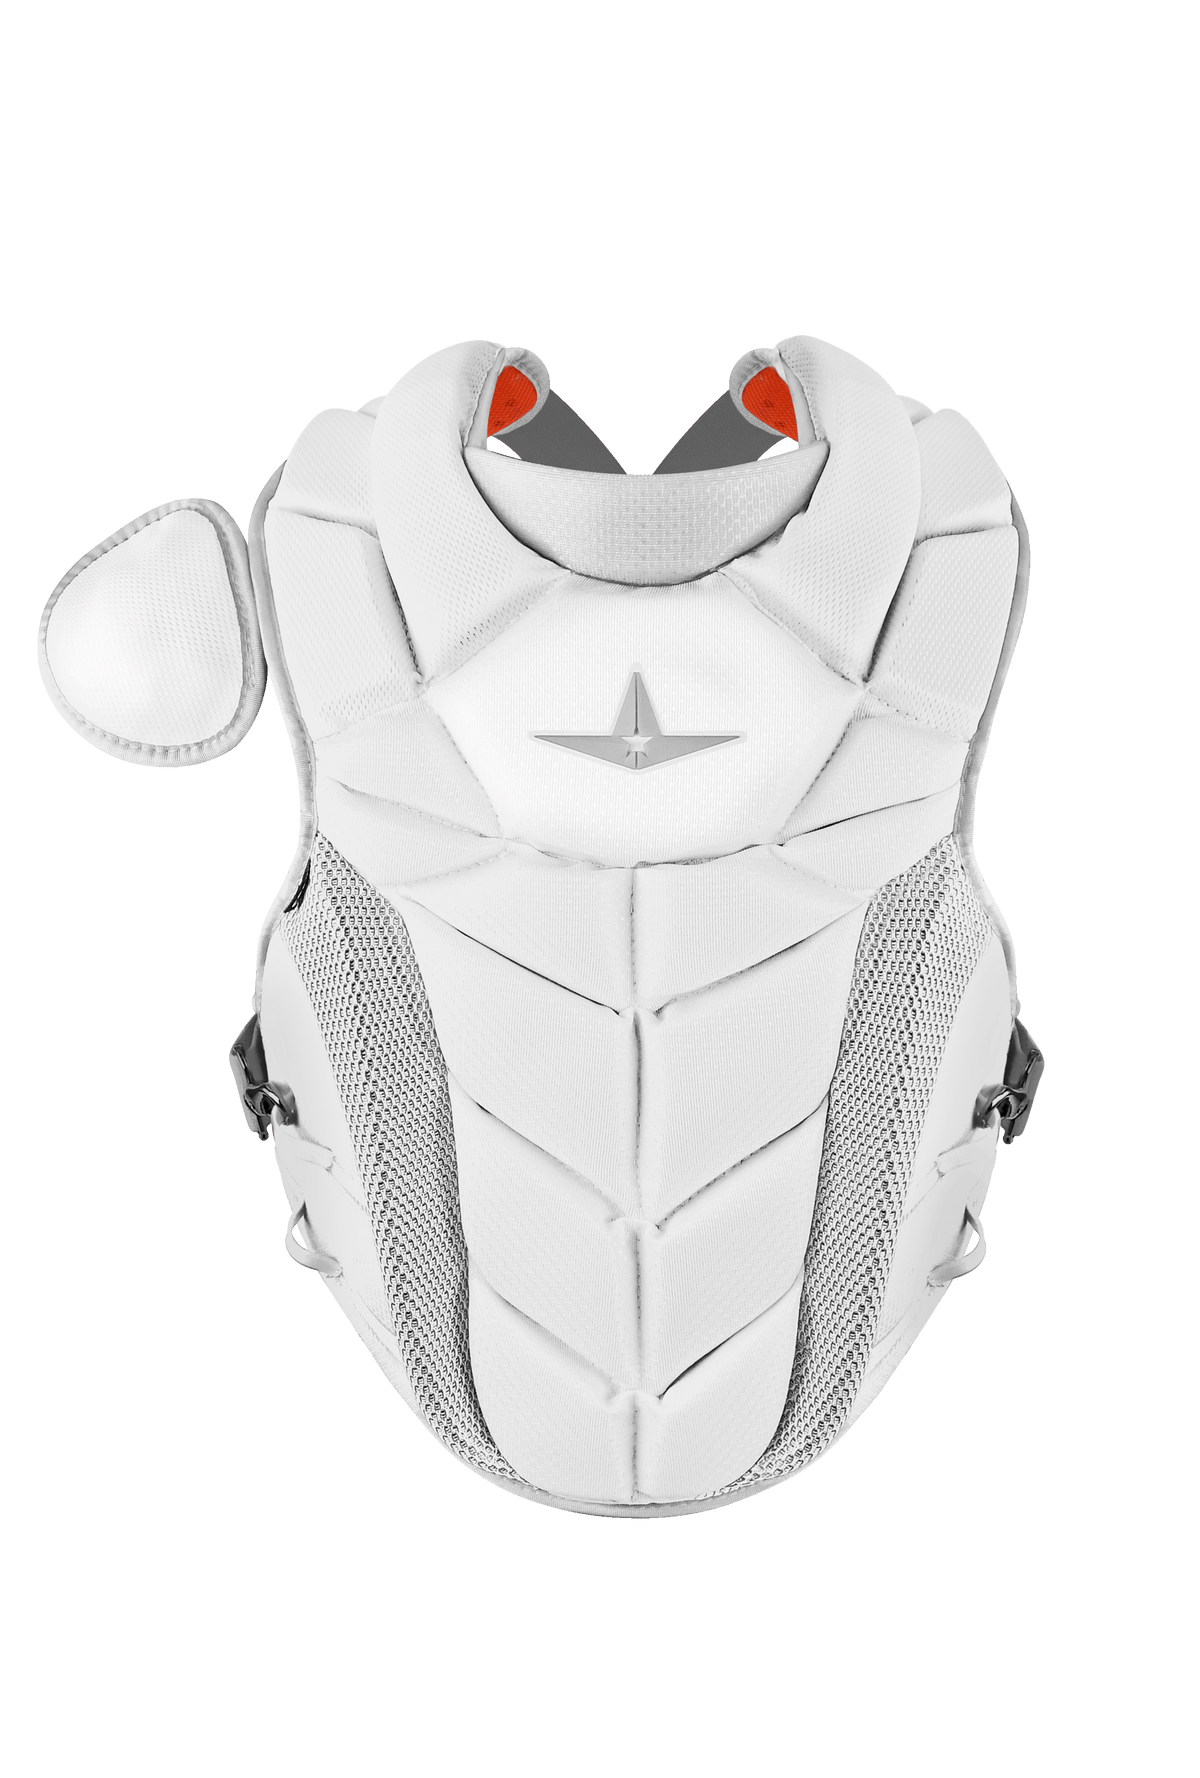 All Star AFX Youth 10-12 Fastpitch Softball Catchers Gear Set - White Royal